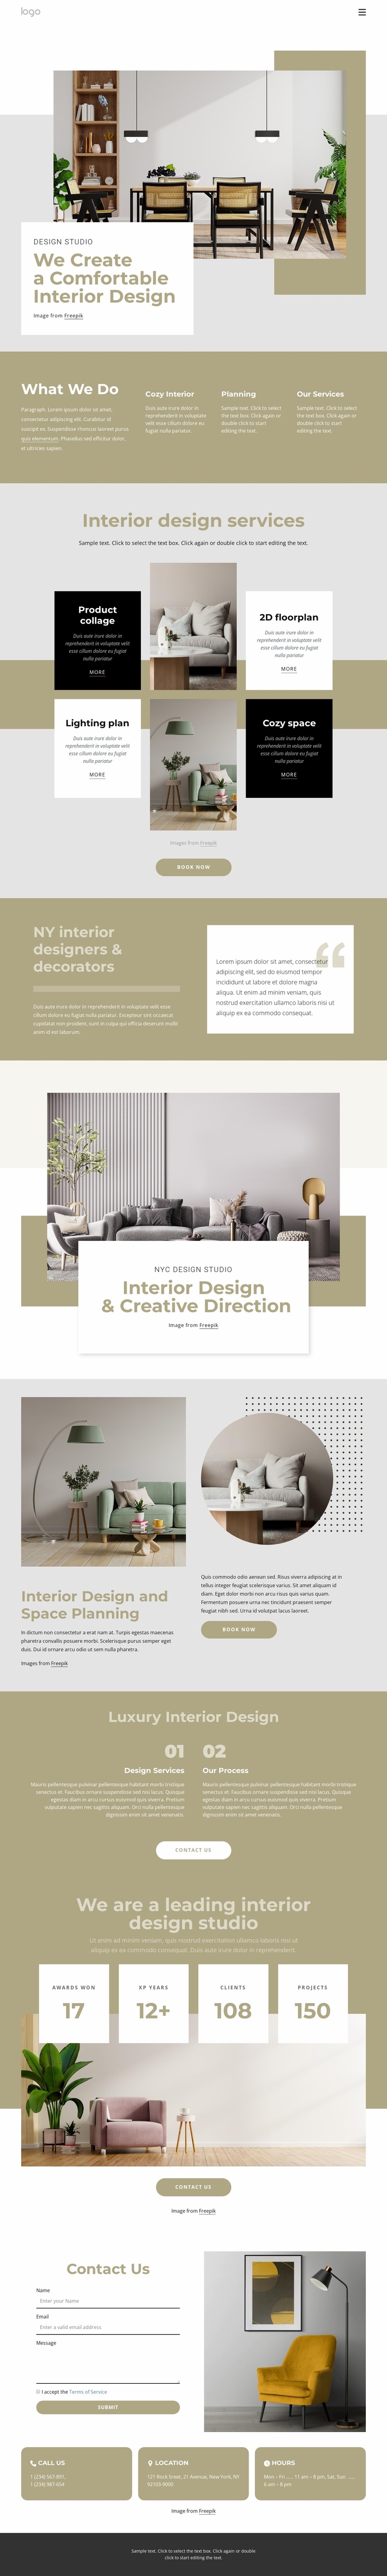 We create a comfortable interiors Landing Page